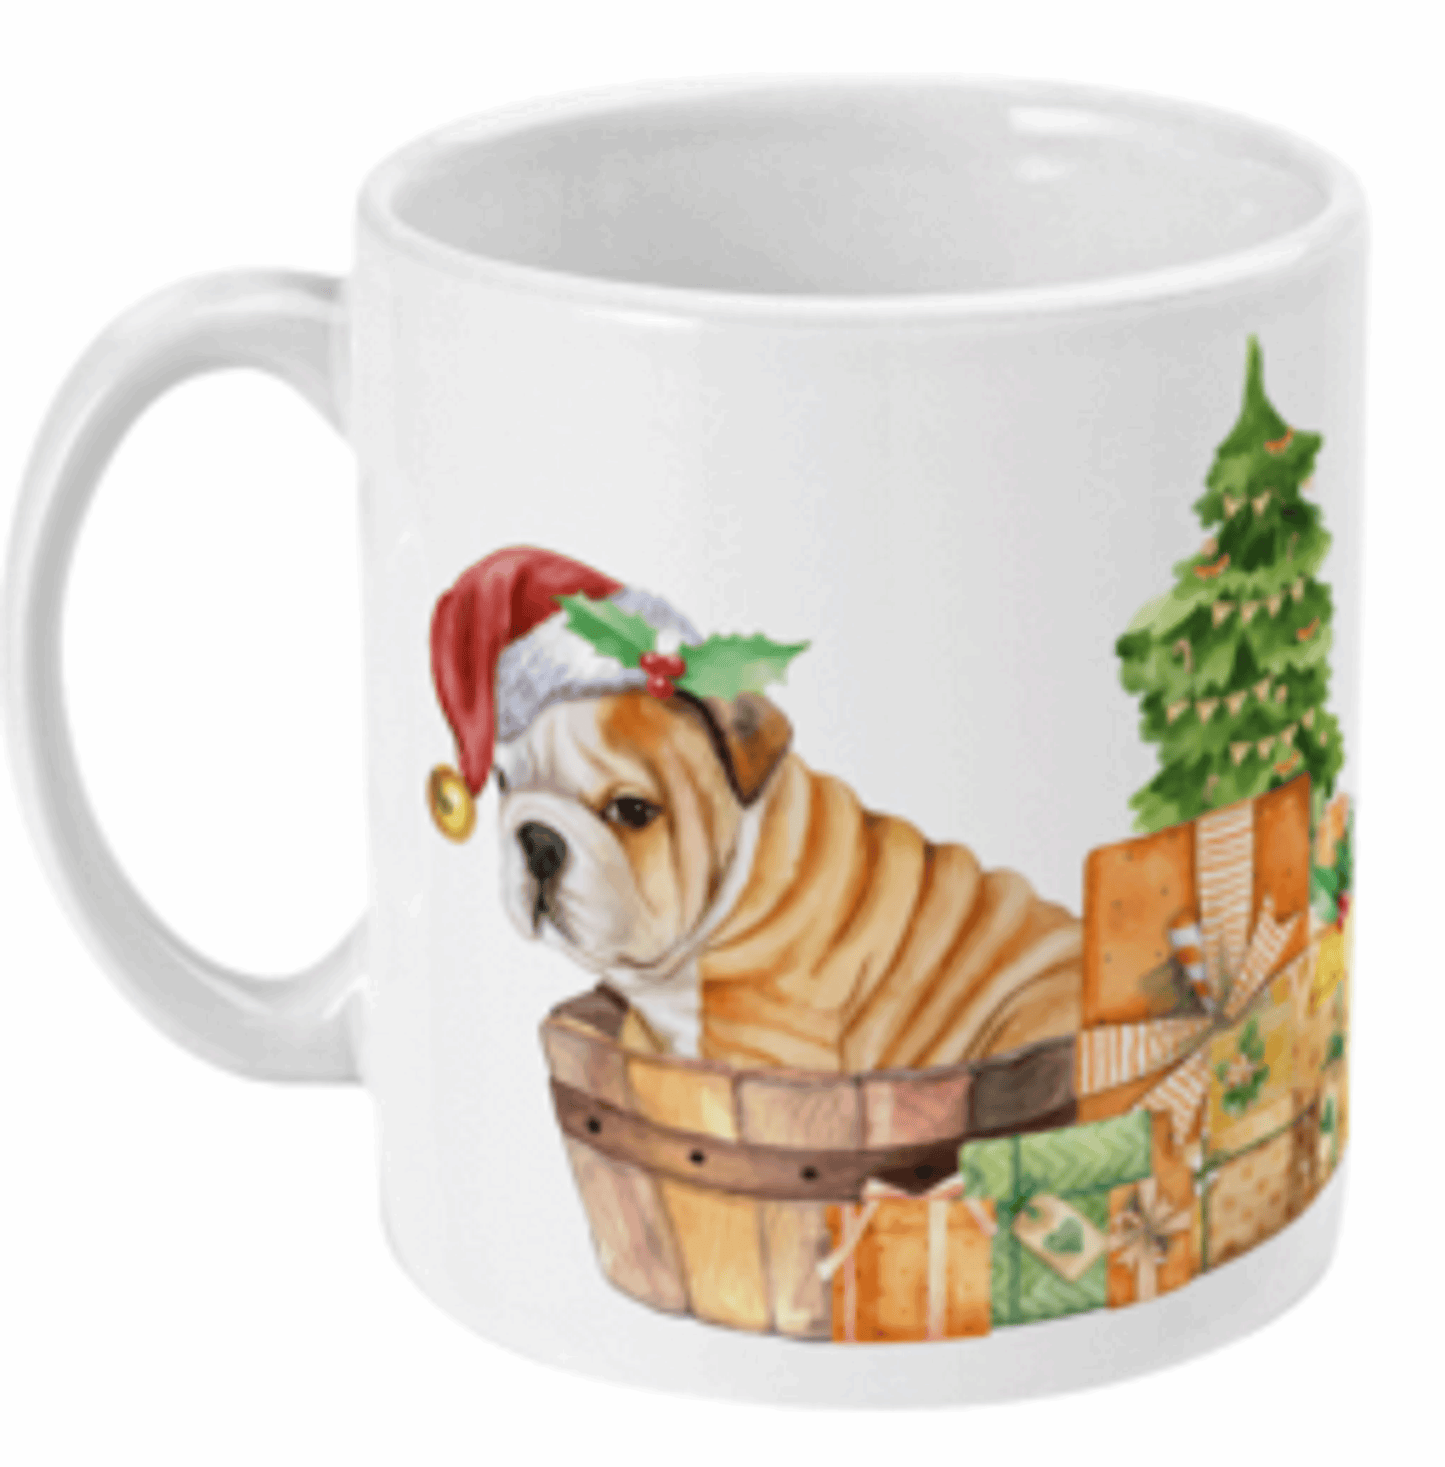  Christmas English Bulldog Sat in Box Next to Tree Mug by Free Spirit Accessories sold by Free Spirit Accessories